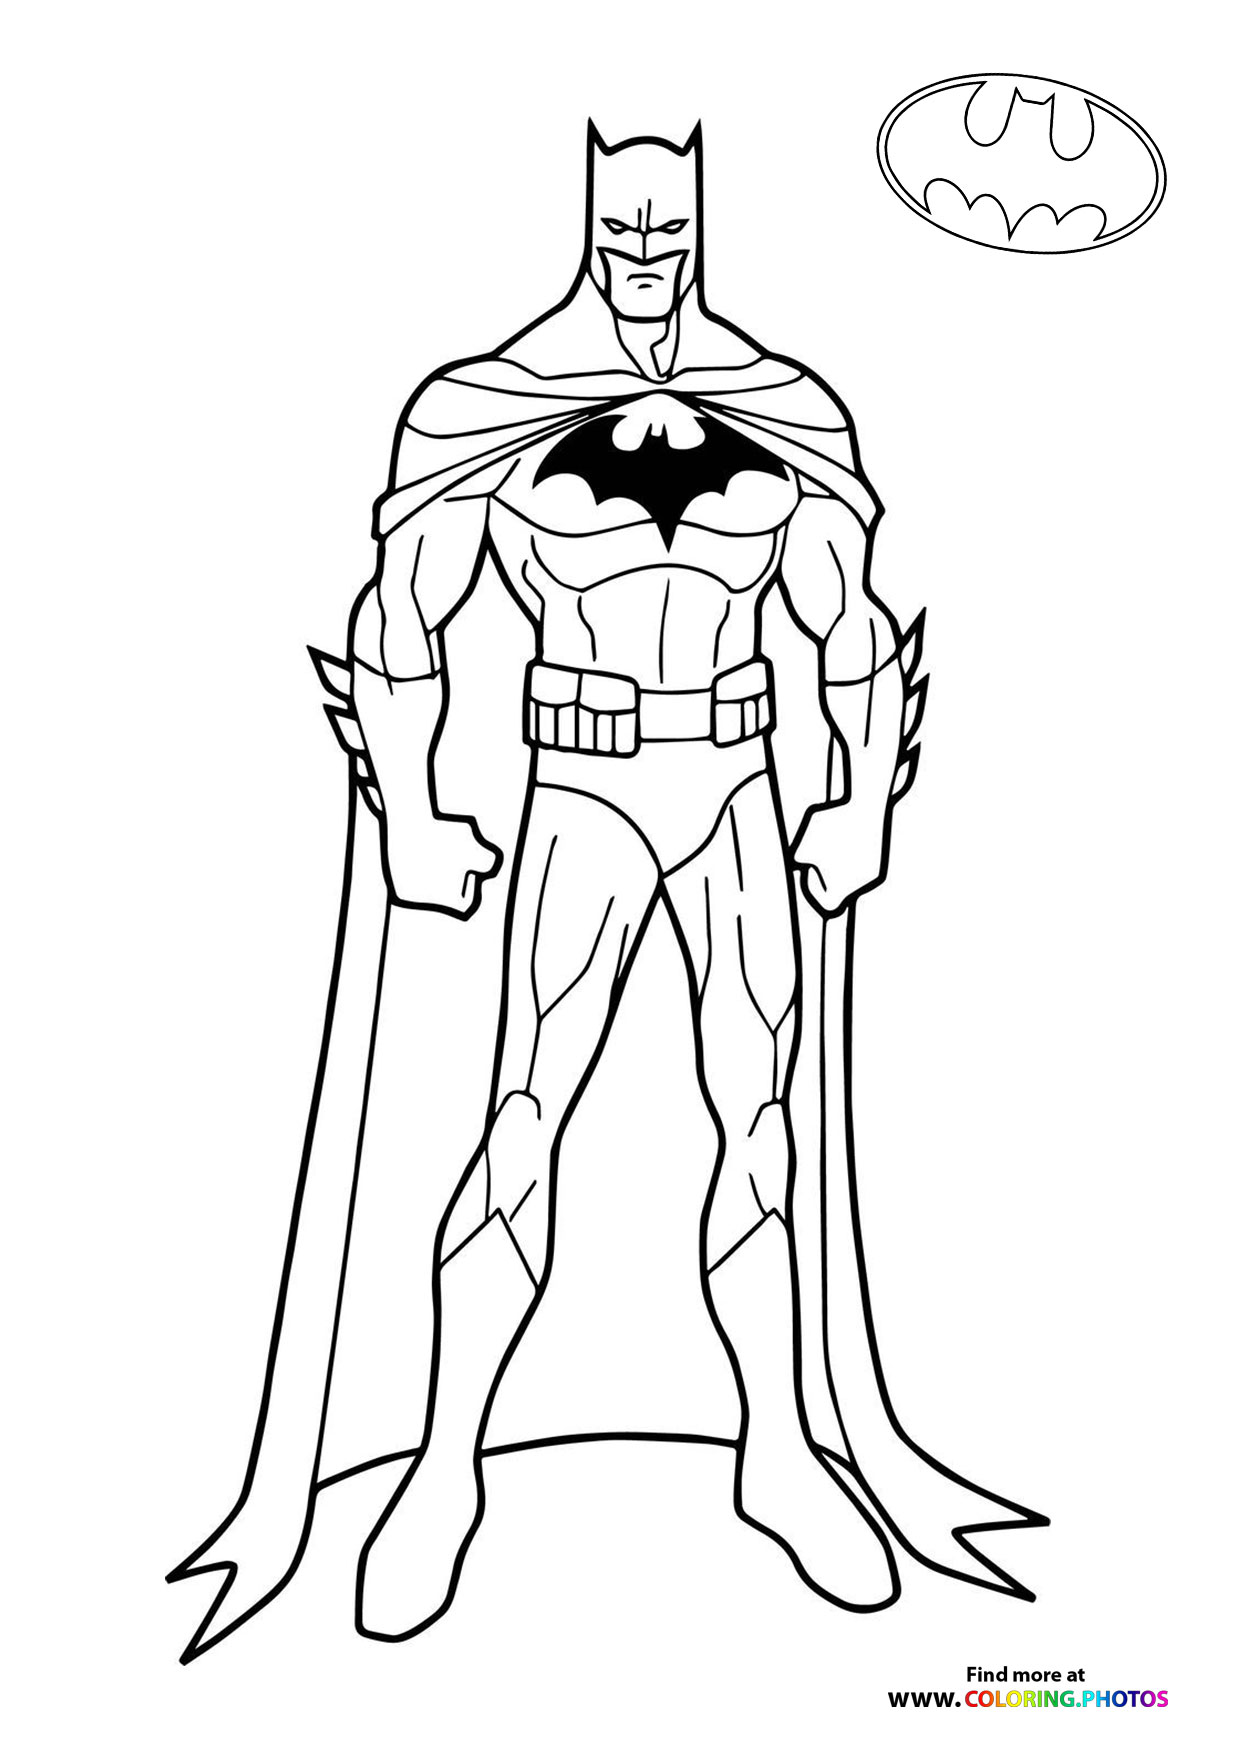 Batman looking strong - Coloring Pages for kids